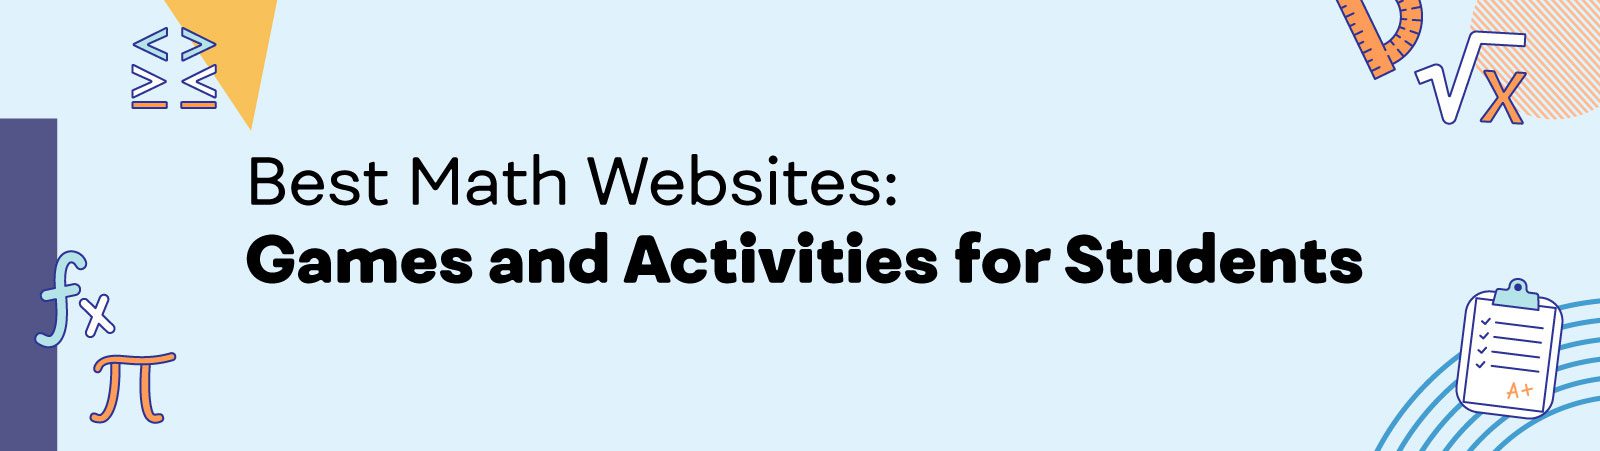 Best math websites: Games and activities for students.